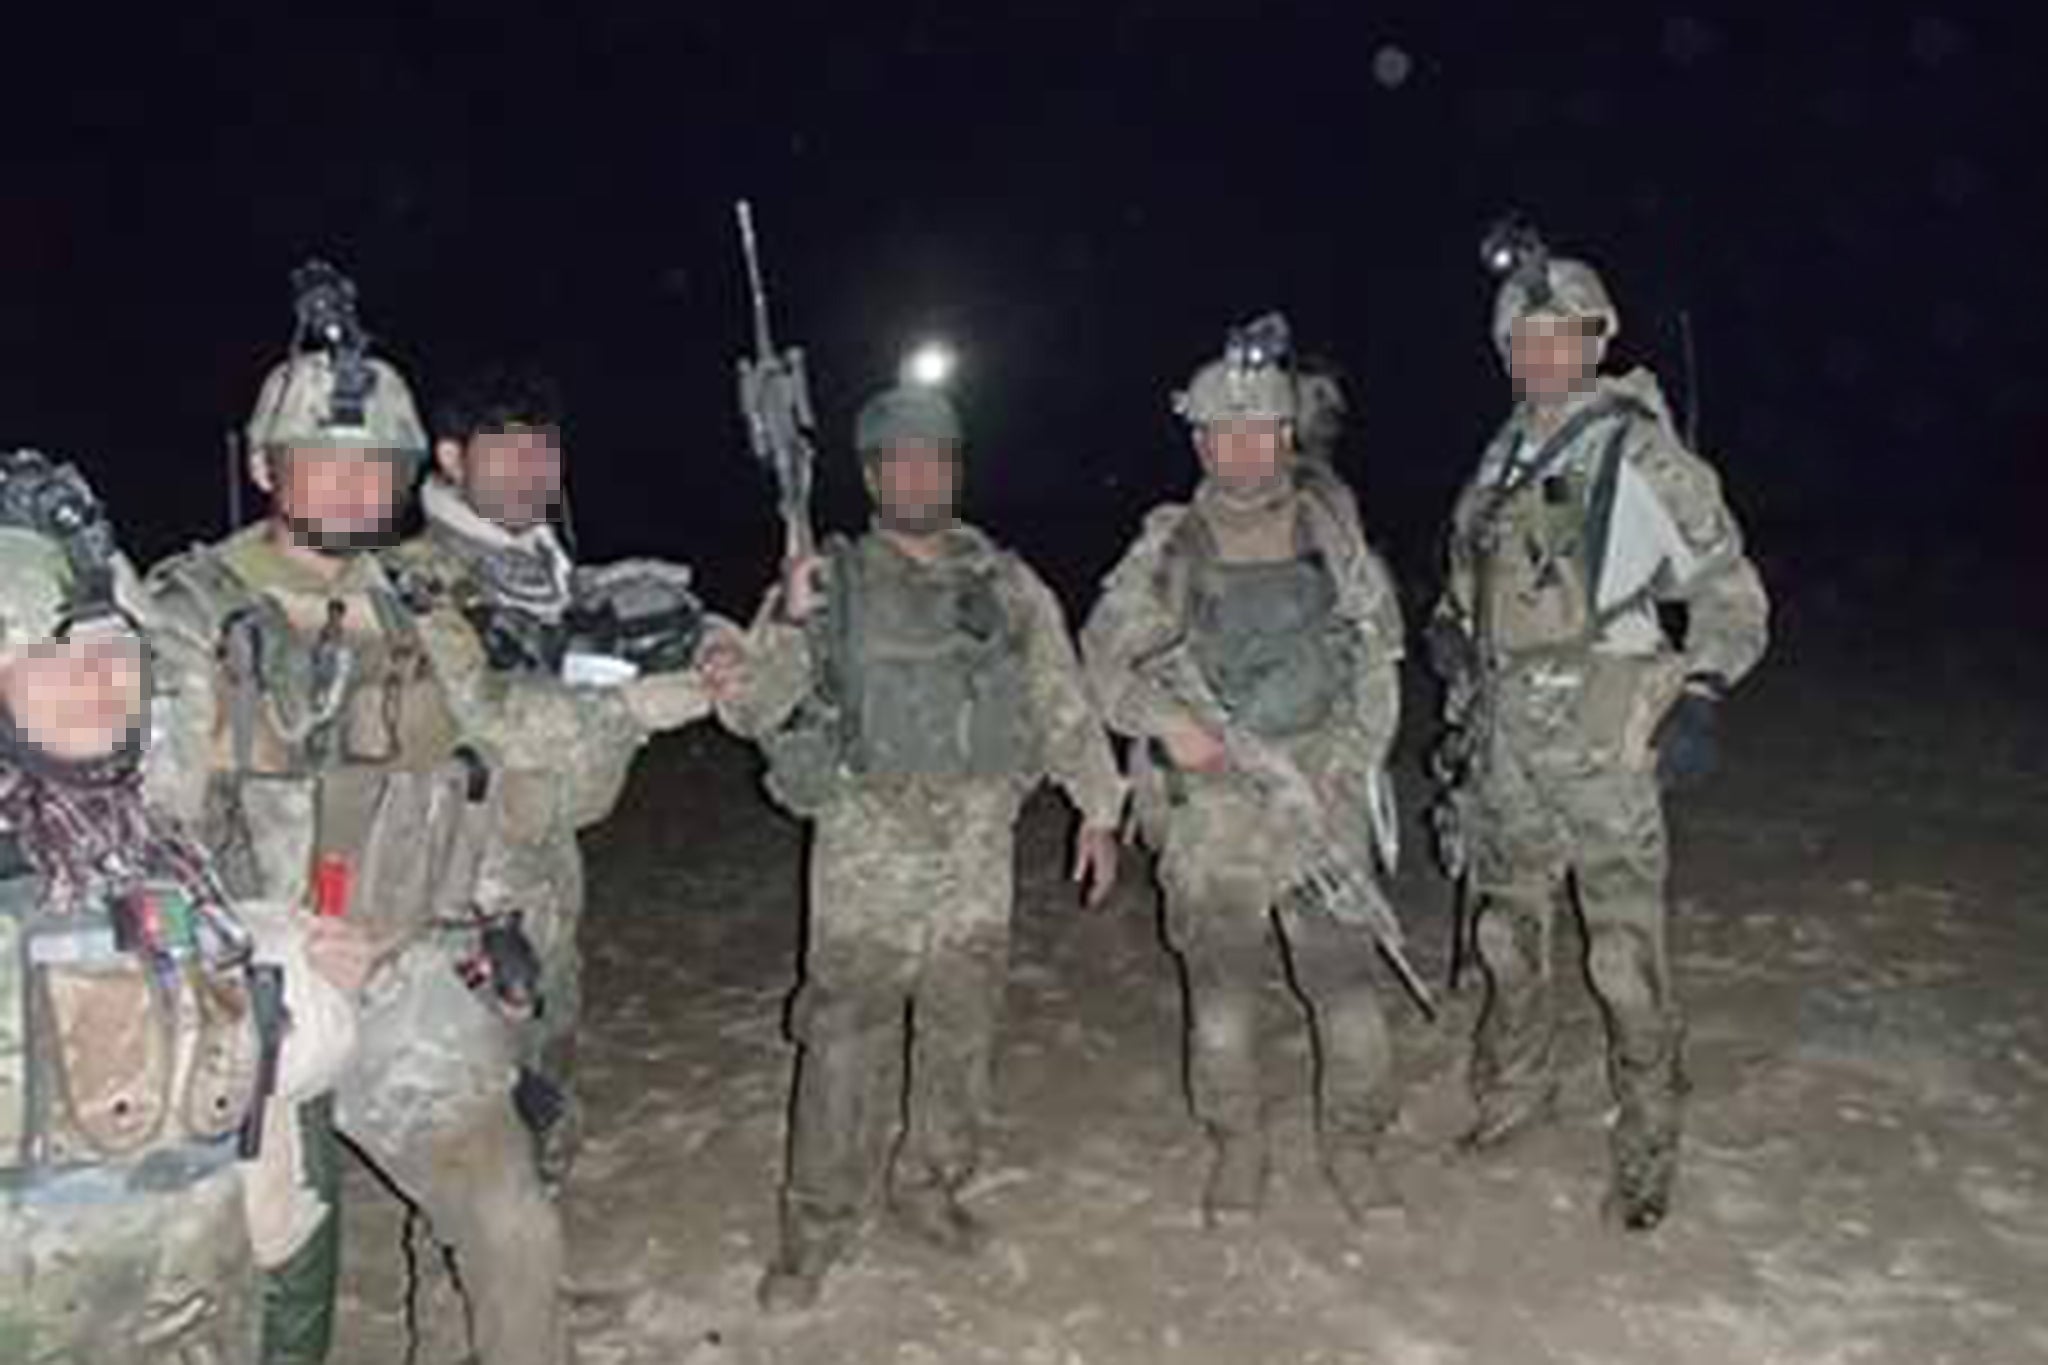 Rahmatullah (far right) during his time in the Afghan special forces